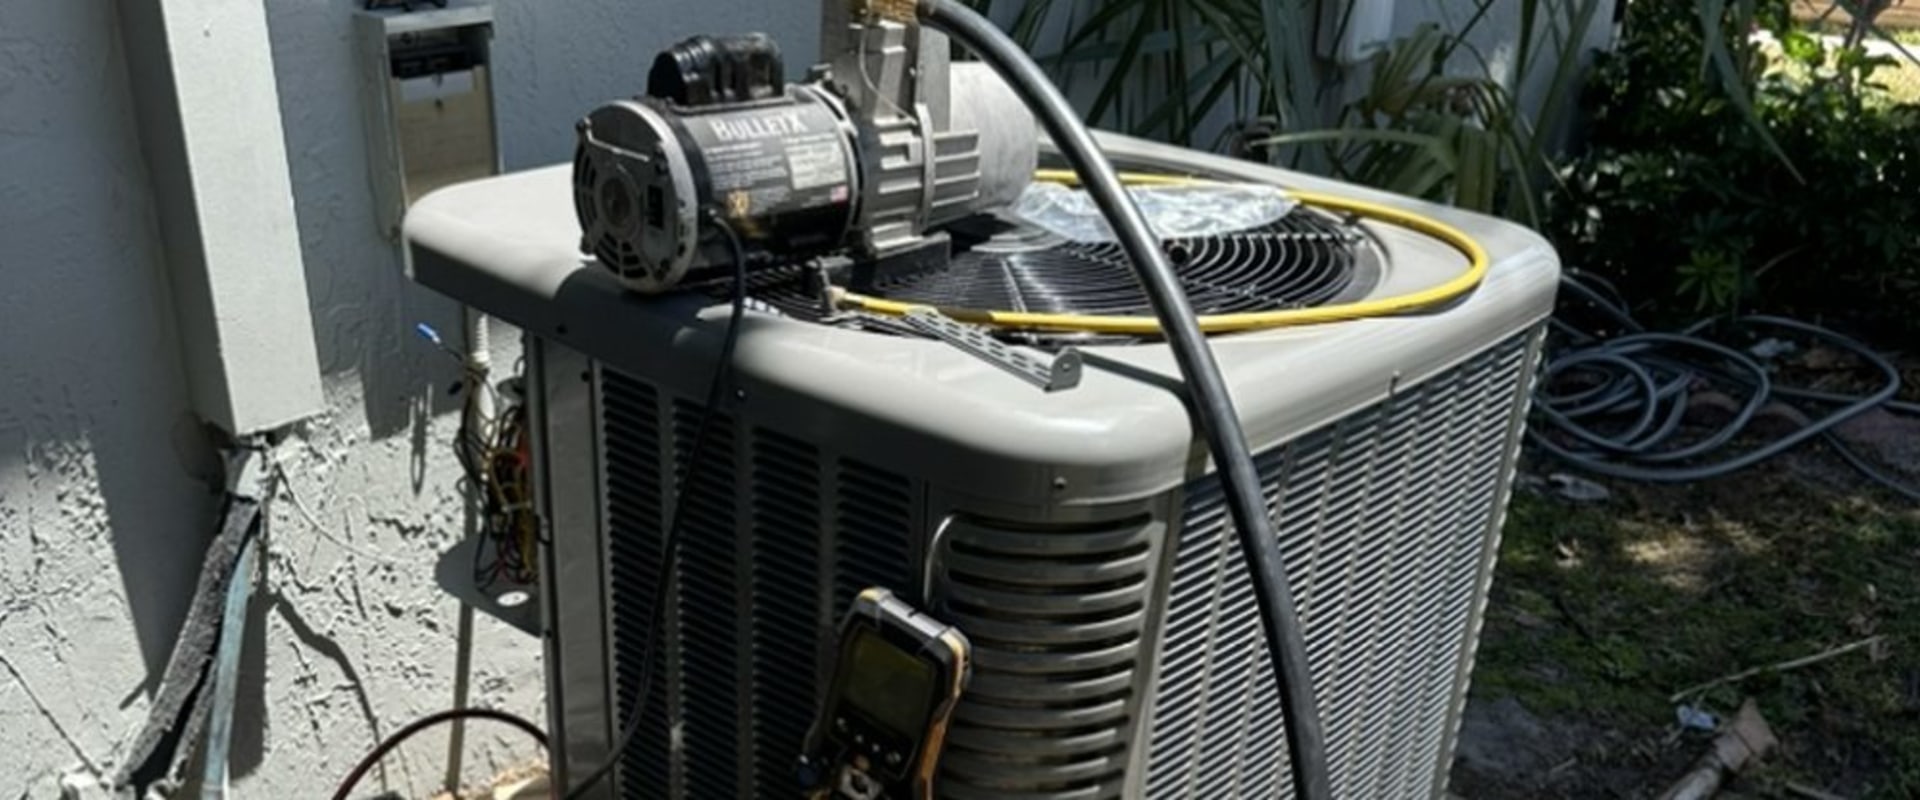 Enhance Your Comfort with HVAC Air Conditioning Tune Up Specials Near Hialeah FL and Custom Air Filters